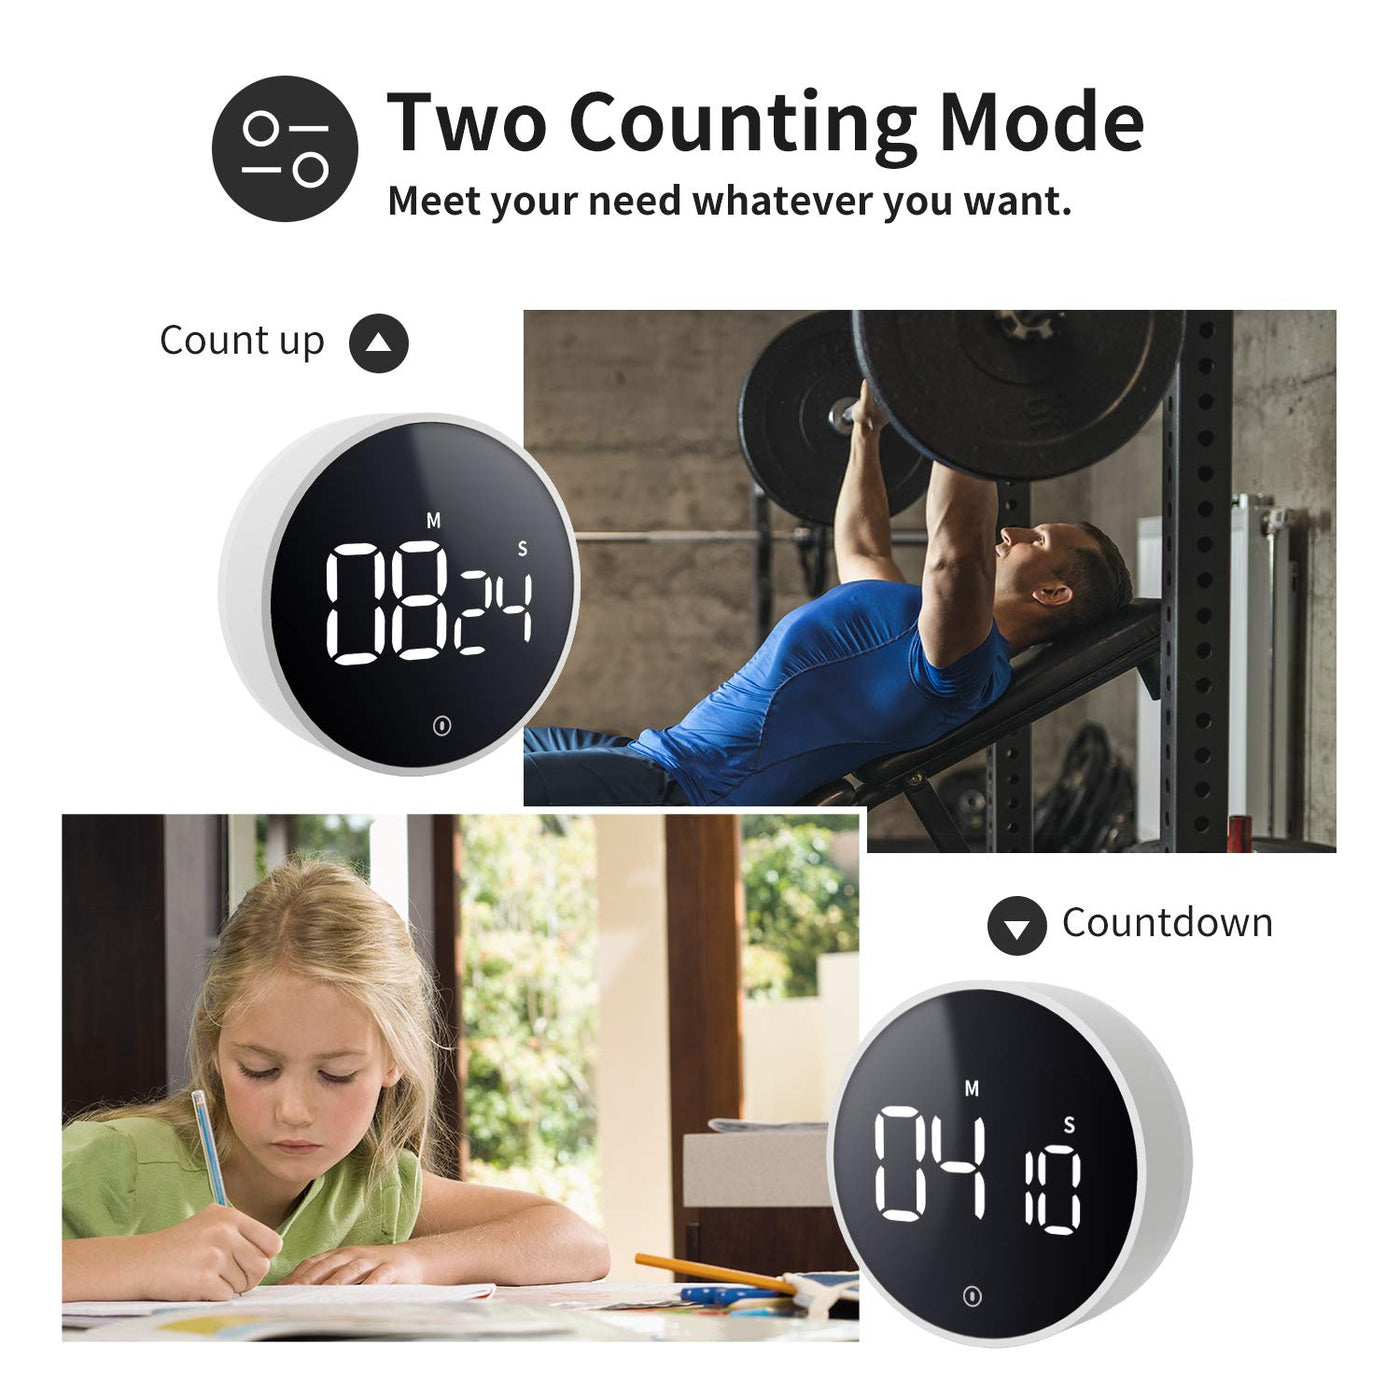 VOCOO Digital Kitchen Timer - Magnetic Countdown Countup Timer with Large  LED Display Volume Adjustable, Easy for Cooking and for Seniors and Kids to